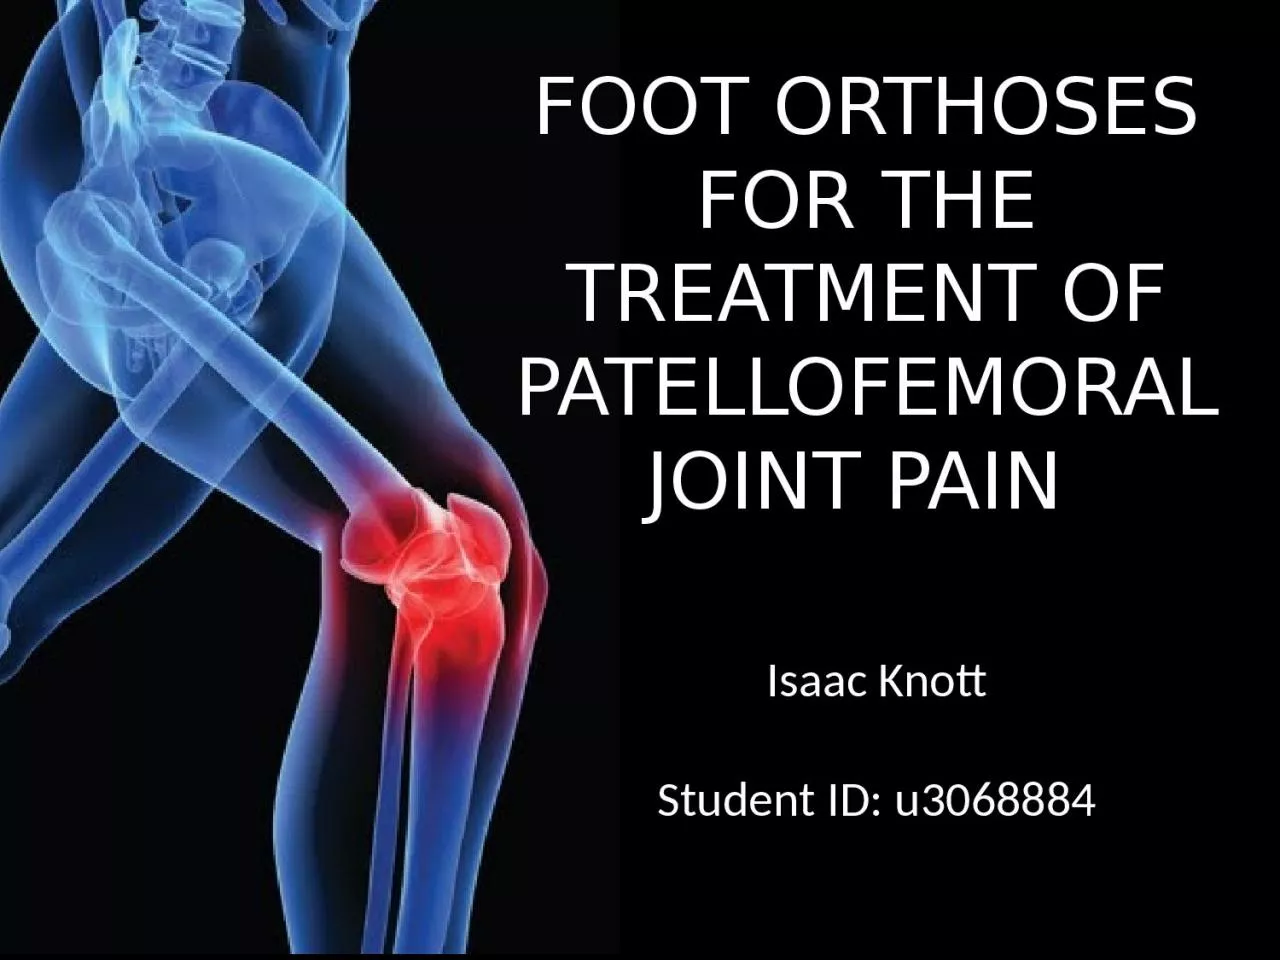 FOOT ORTHOSES FOR THE TREATMENT OF PATELLOFEMORAL JOINT PAIN